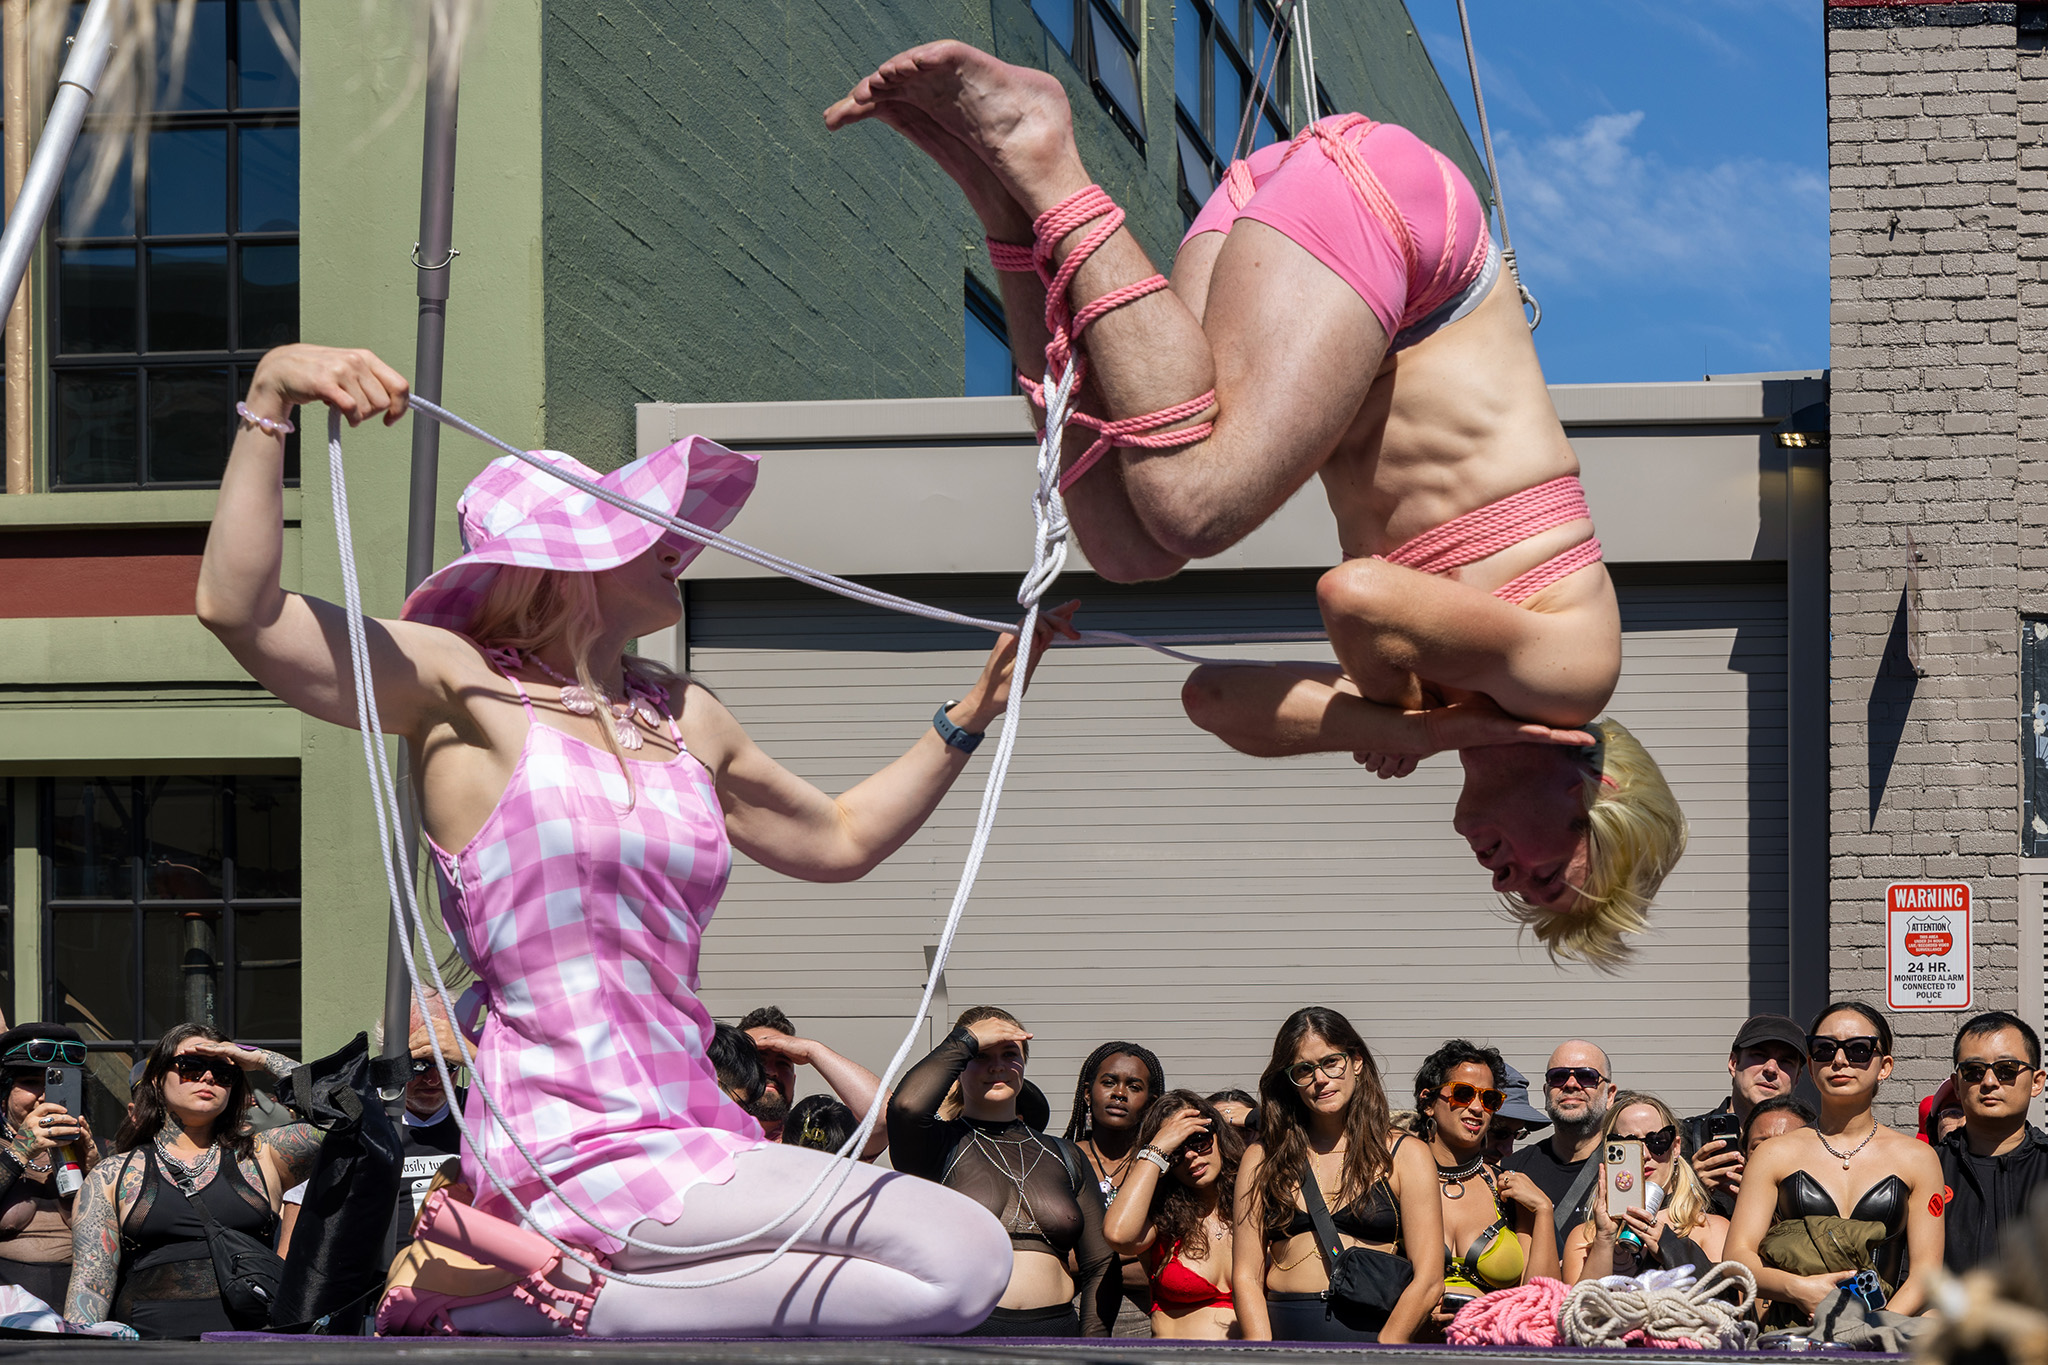 Folsom Street Fair dominated SF this weekend: Here are the photos